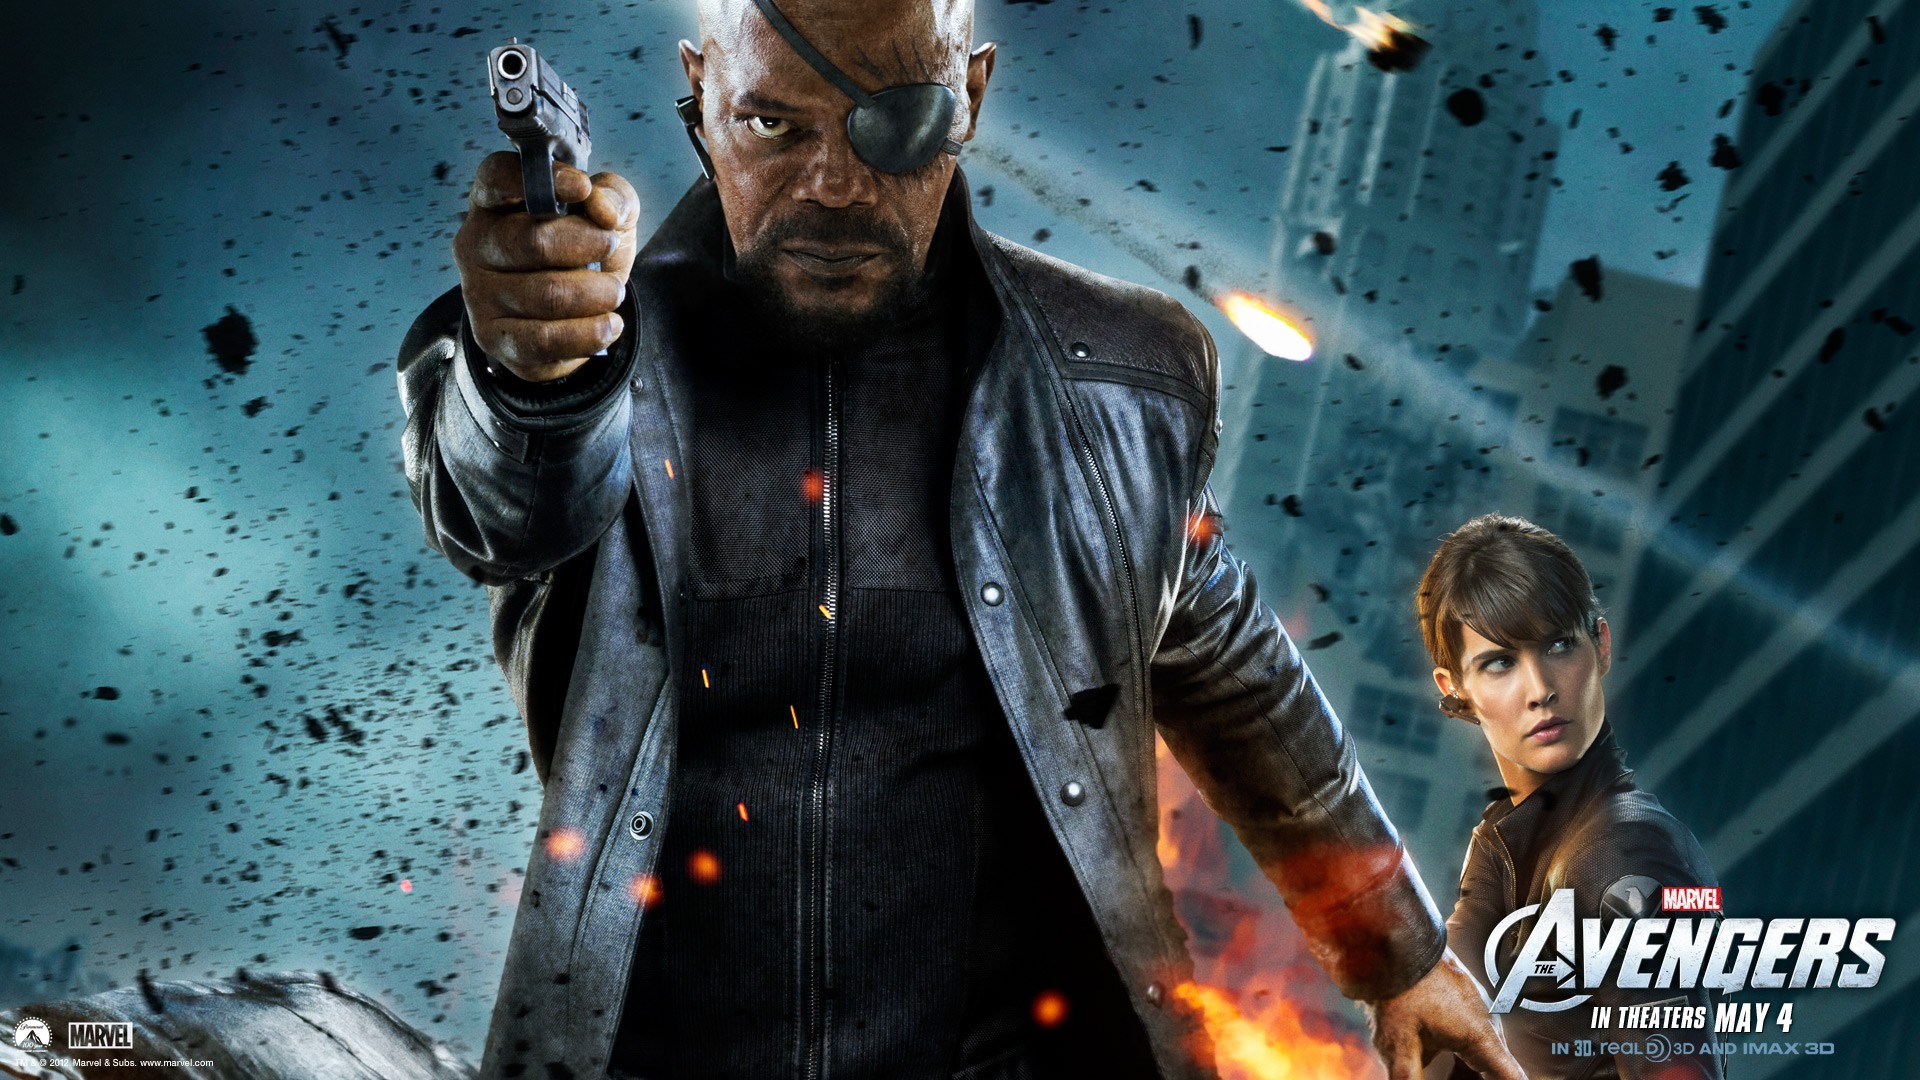 Wallpaper, movies, The Avengers, Marvel Cinematic Universe, Samuel L Jackson, Nick Fury, Cobie Smulders, Maria Hill, screenshot, special effects, pc game, action film 1920x1080